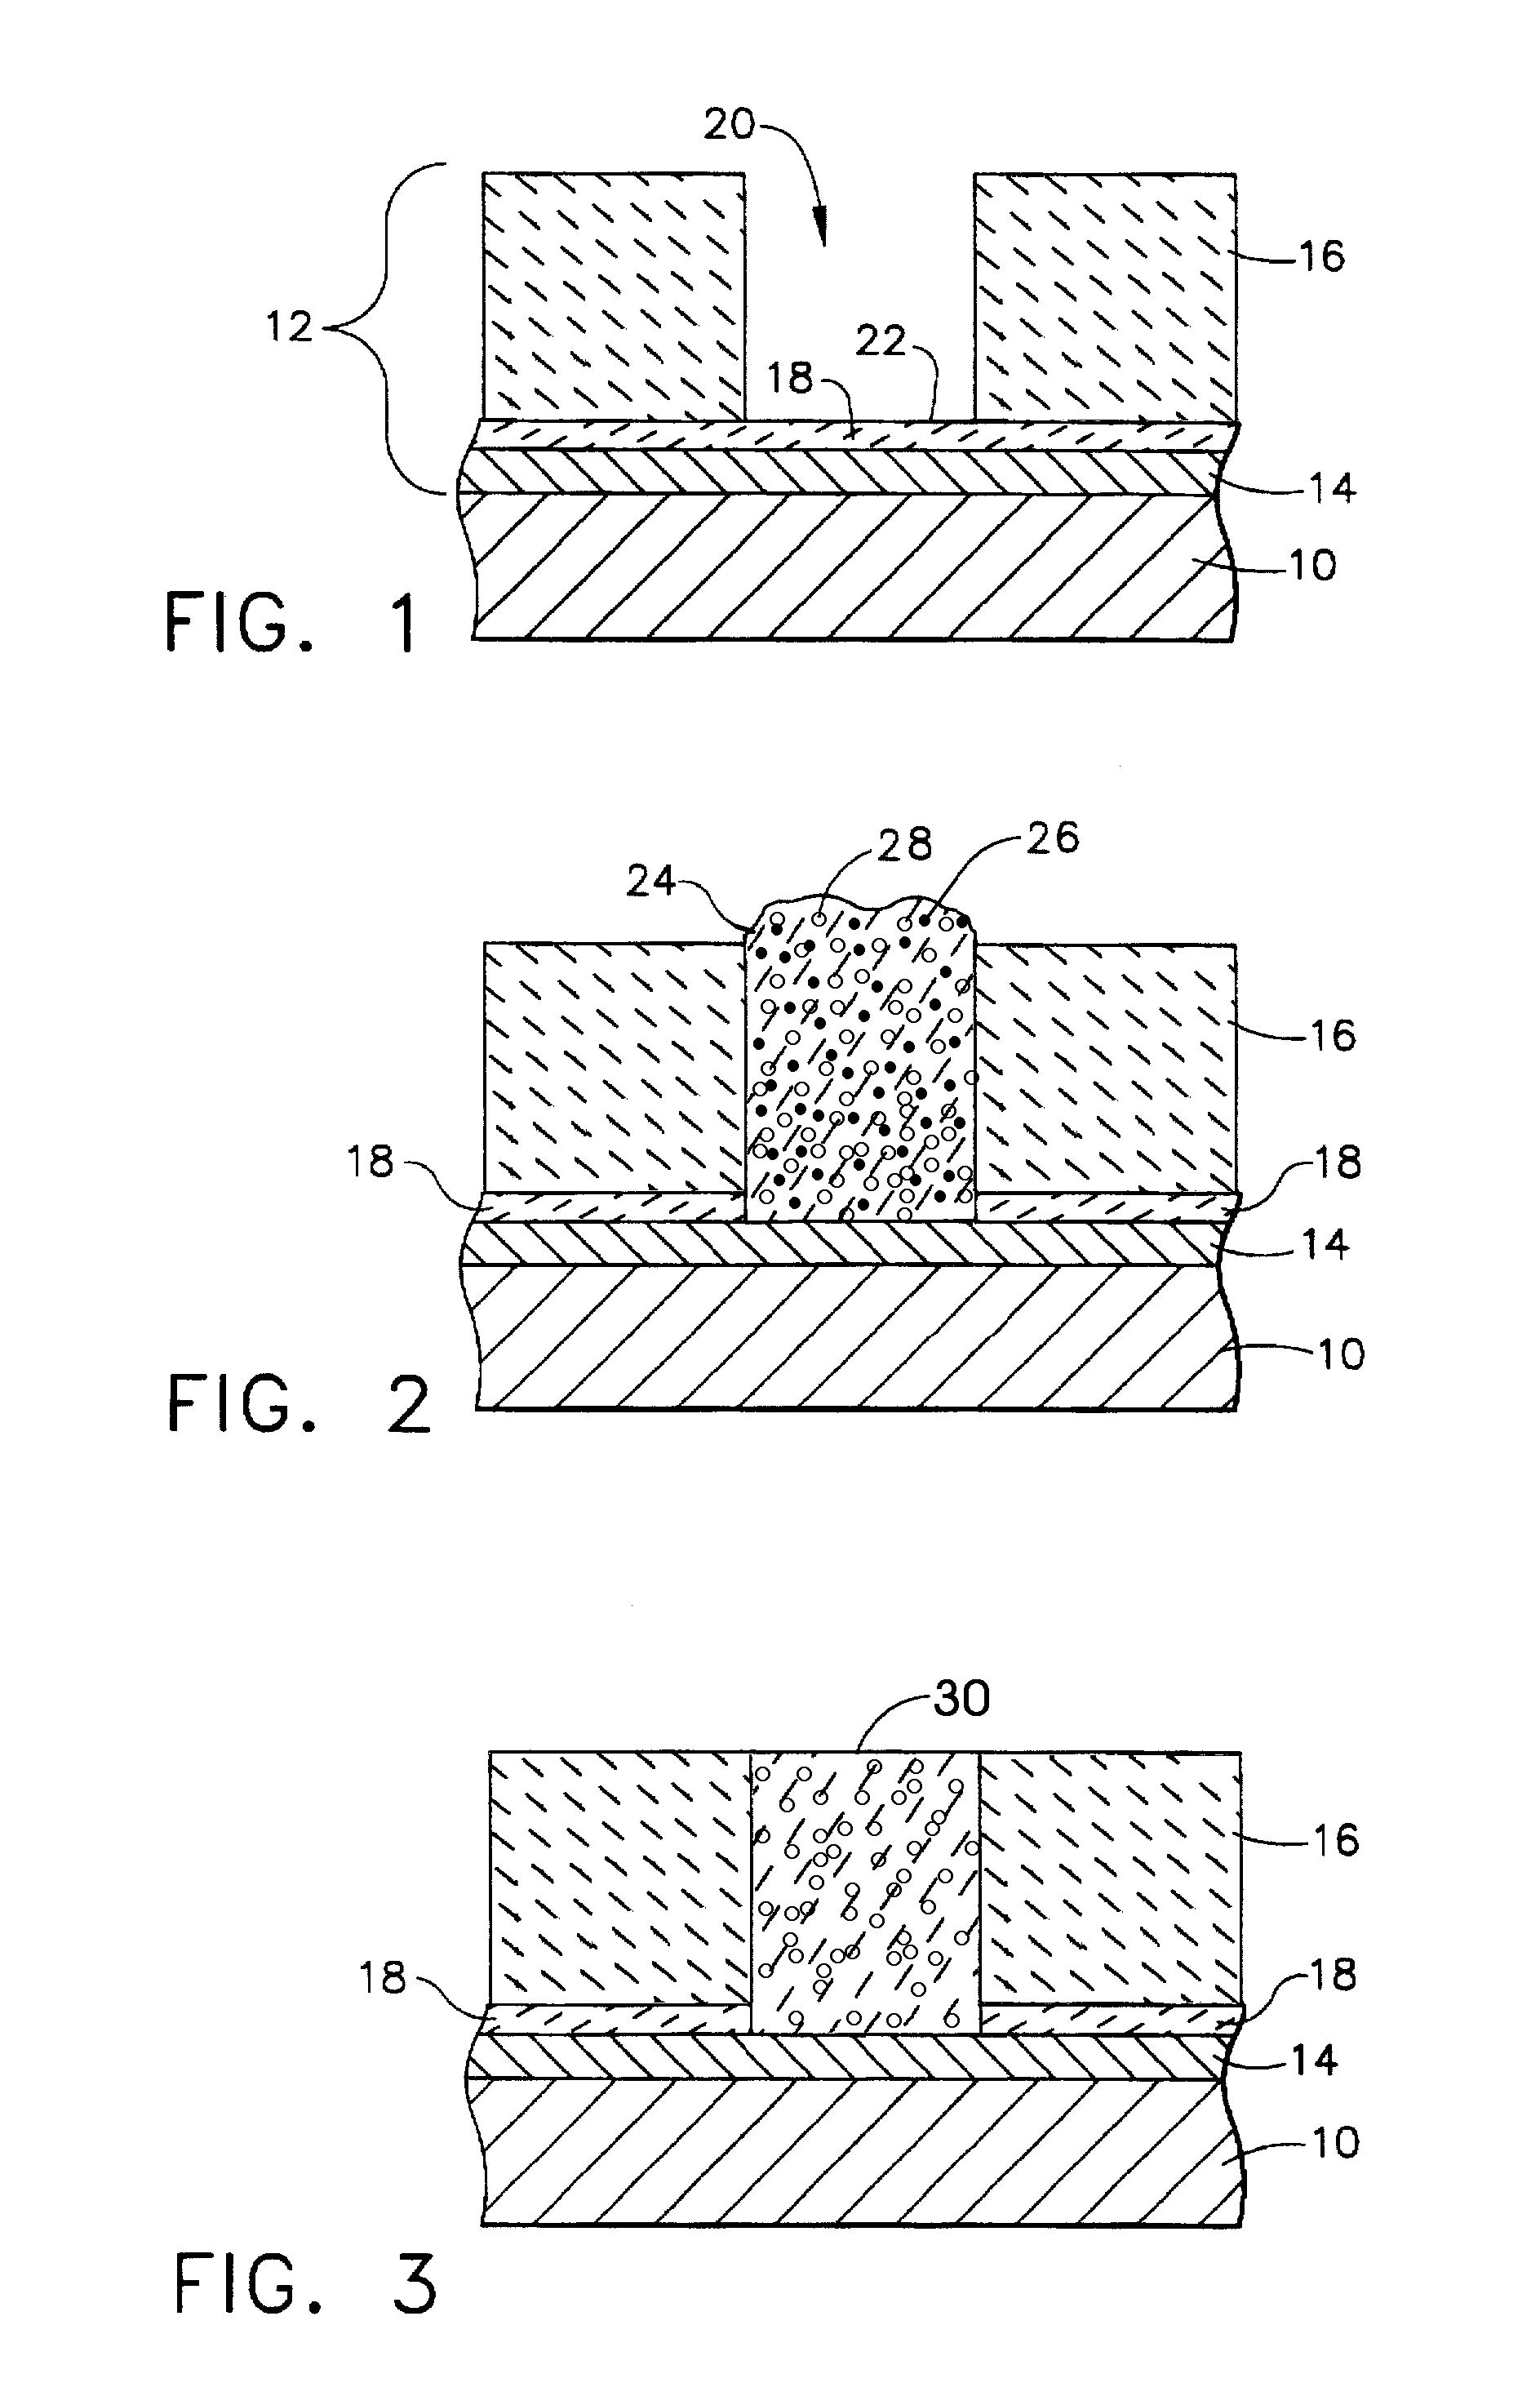 Method of repairing a thermal barrier coating and repaired coating formed thereby